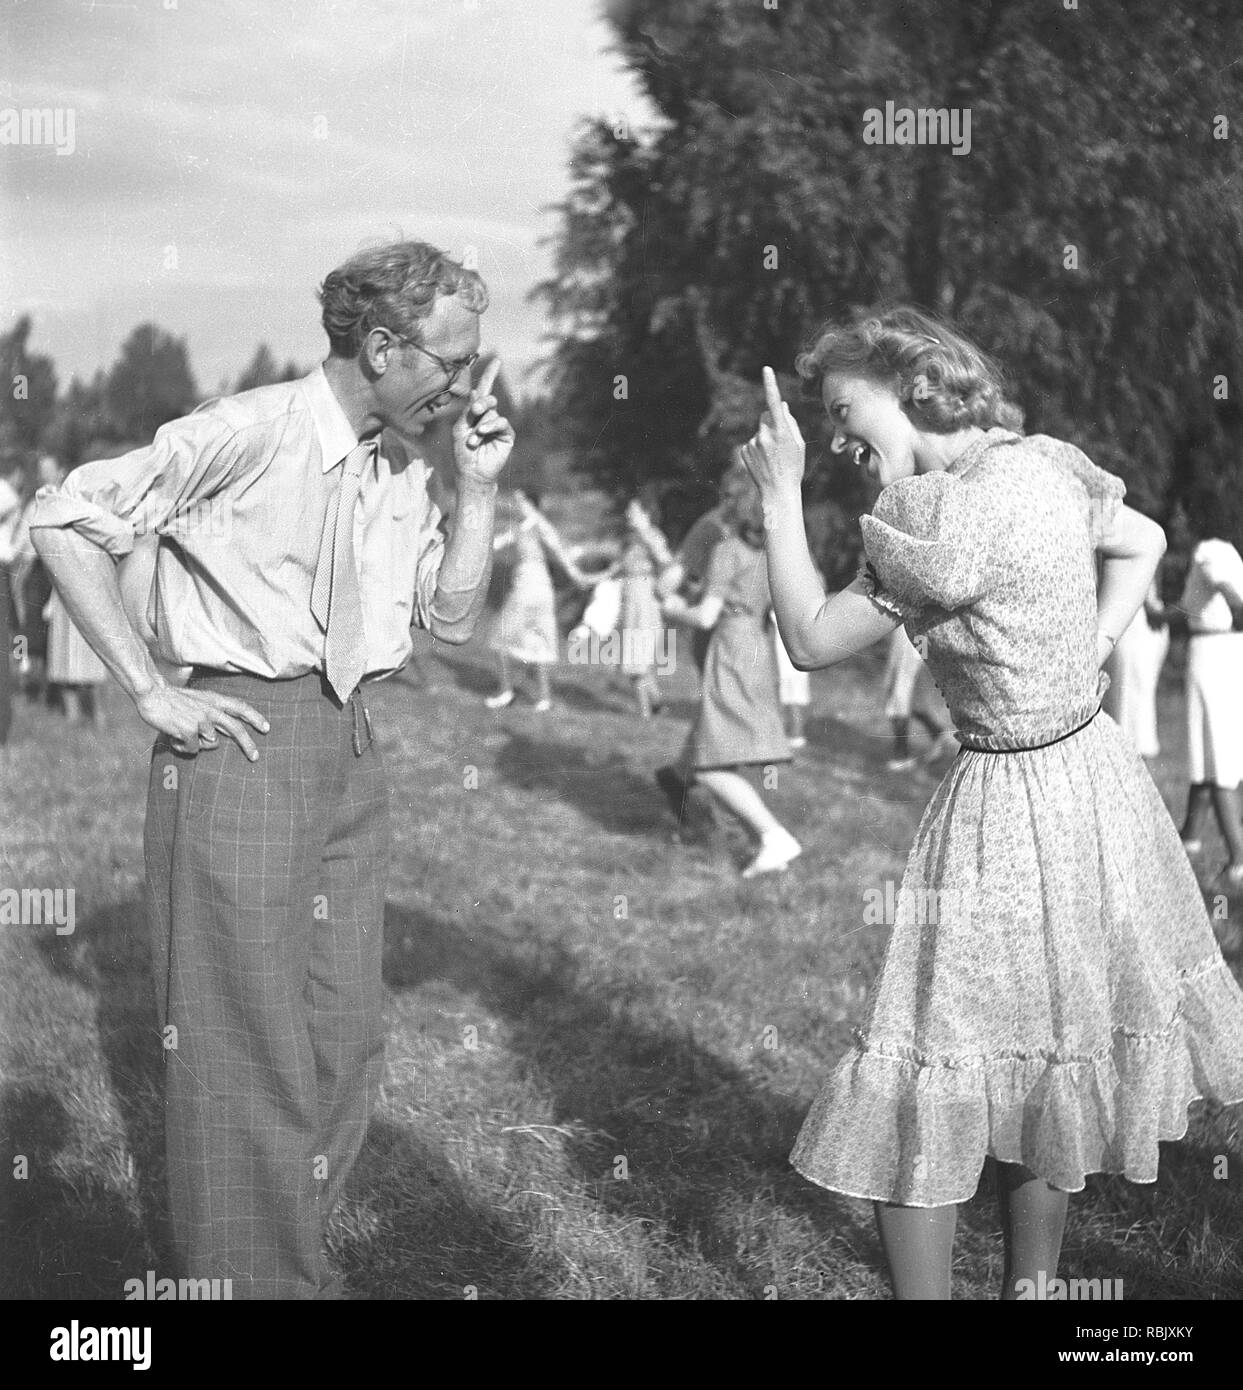 Summer dance in the 1940s. At an outdoor summer dance event a man and a woman are standing doing some odd dancing. Photo Kristoffersson Ref 219-29. Sweden 1941 Stock Photo